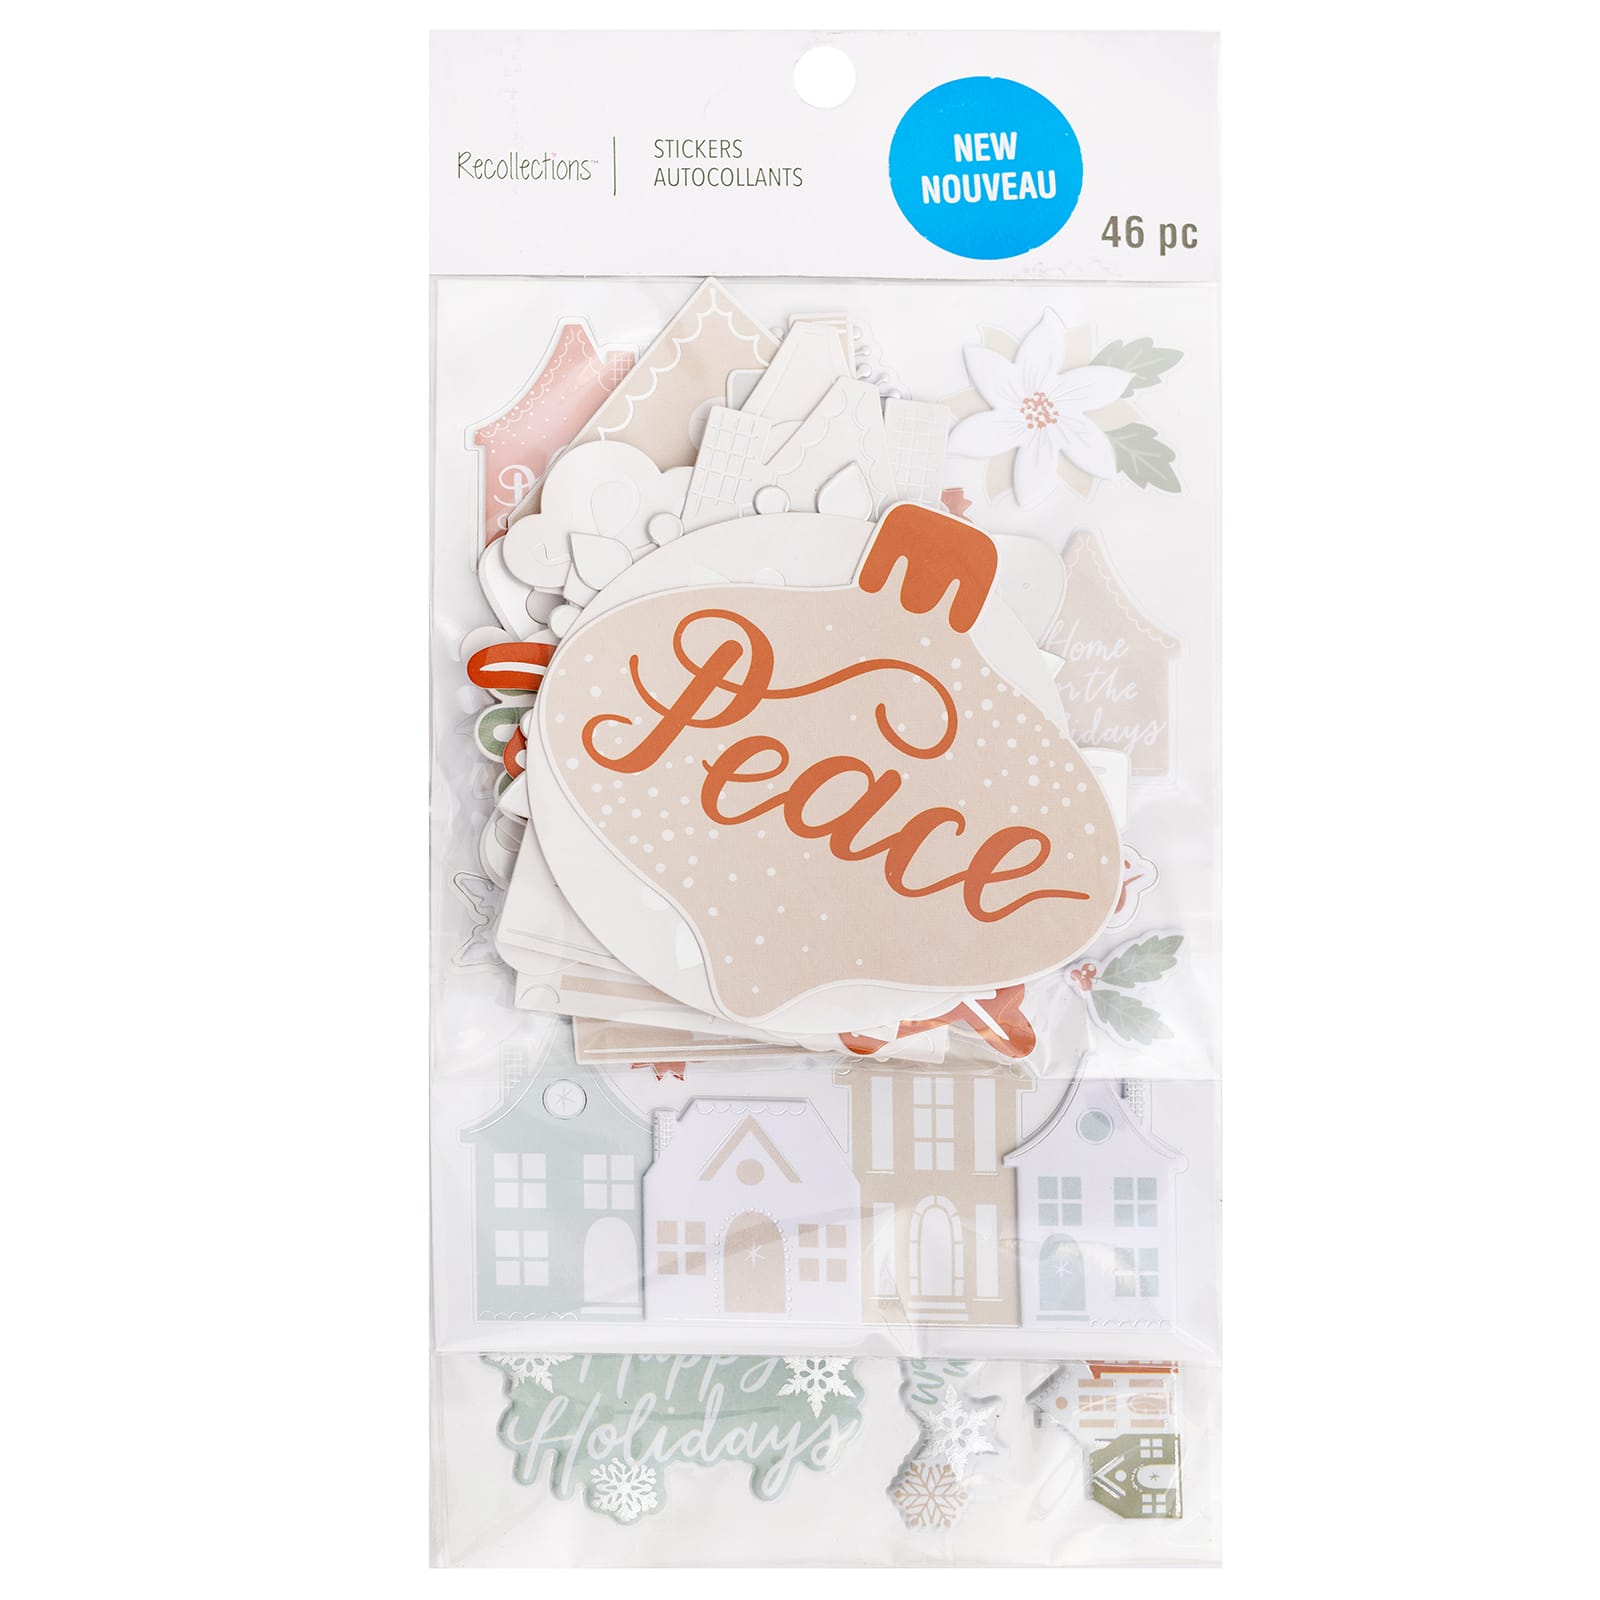 Recollections Christmas Sticker - Each